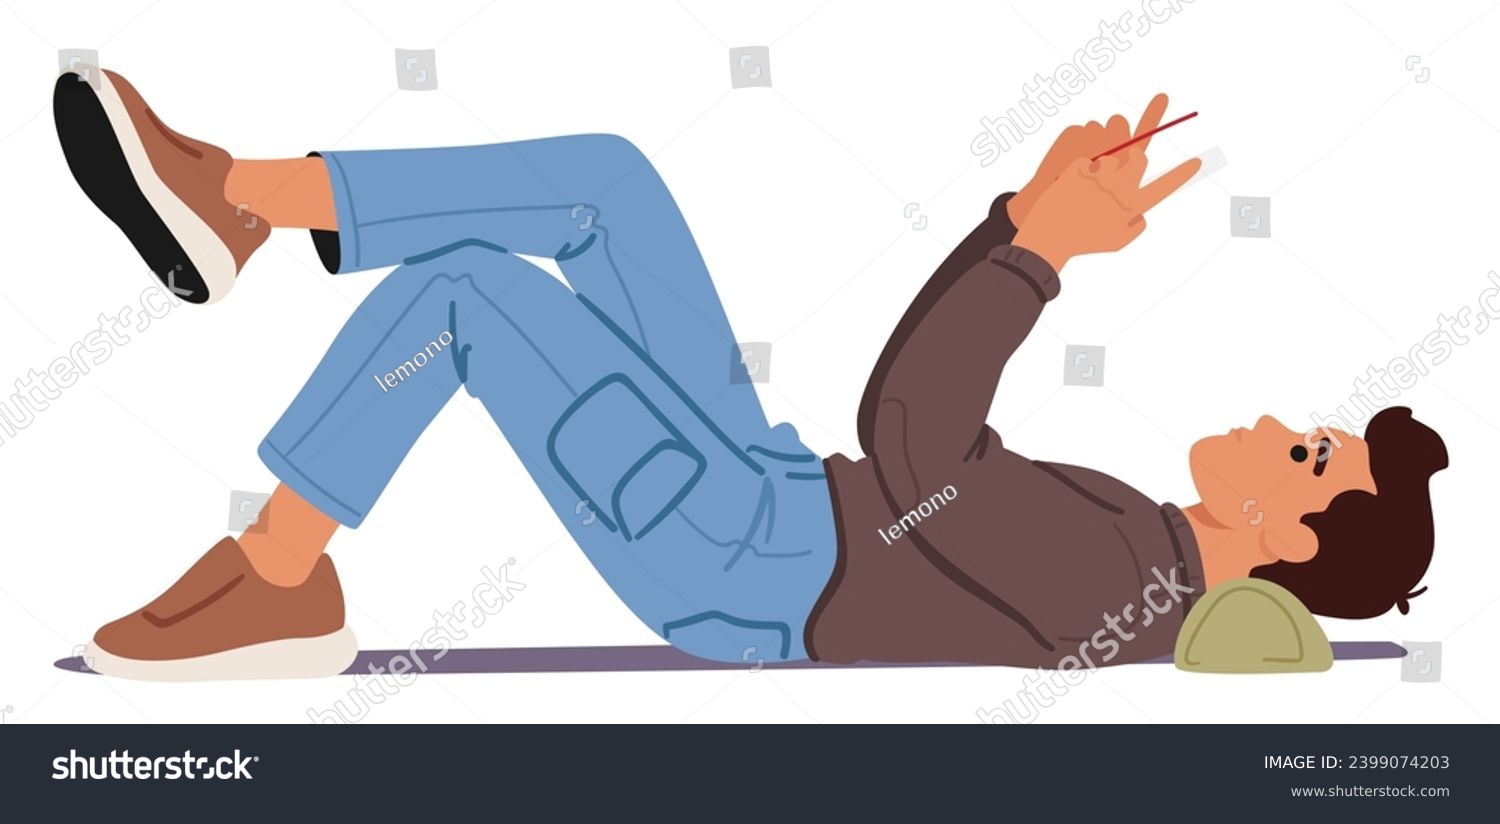 SVG of Optimal Reading Posture, Male Character Lying On Back With A Supportive Pillow, Maintaining A Straight Spine. Keep Knees Slightly Bent And Hold The Reading Material At Eye Level For Comfort svg